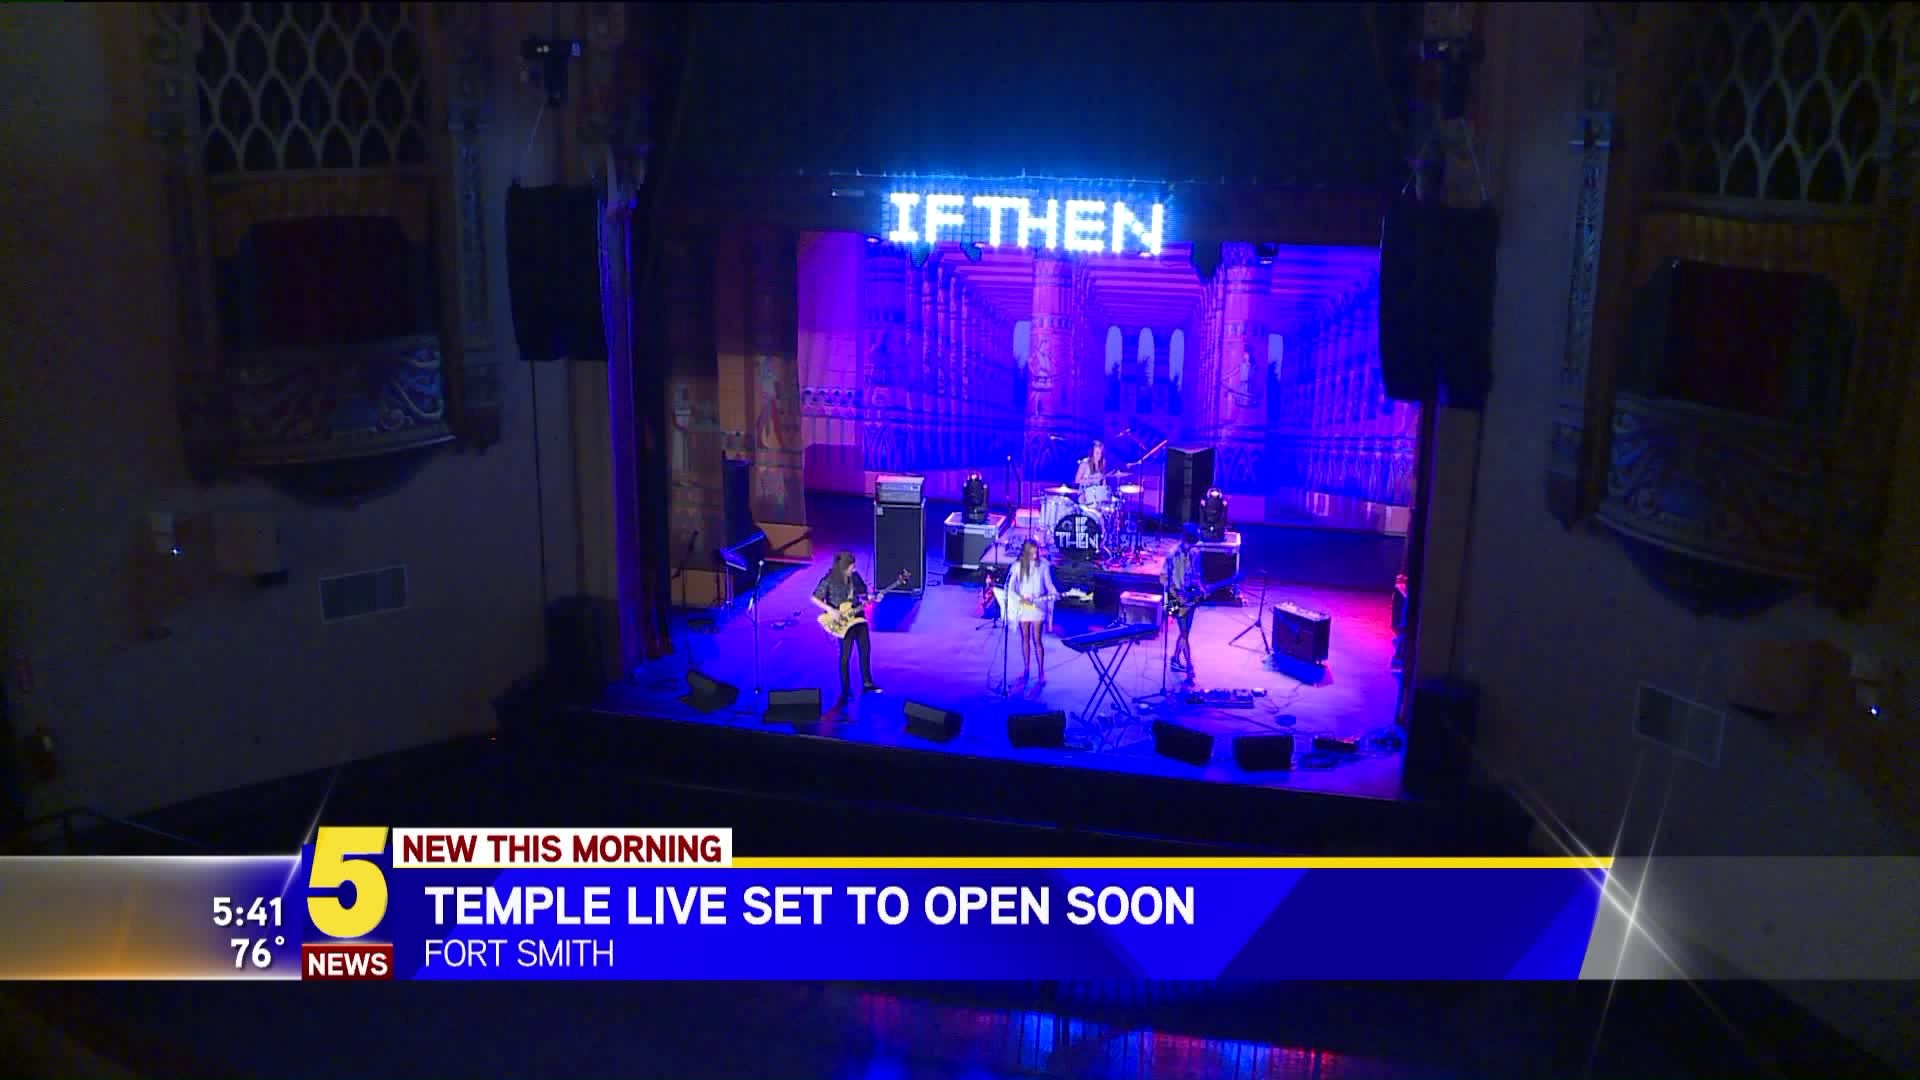 Temple Live Set To Open Soon